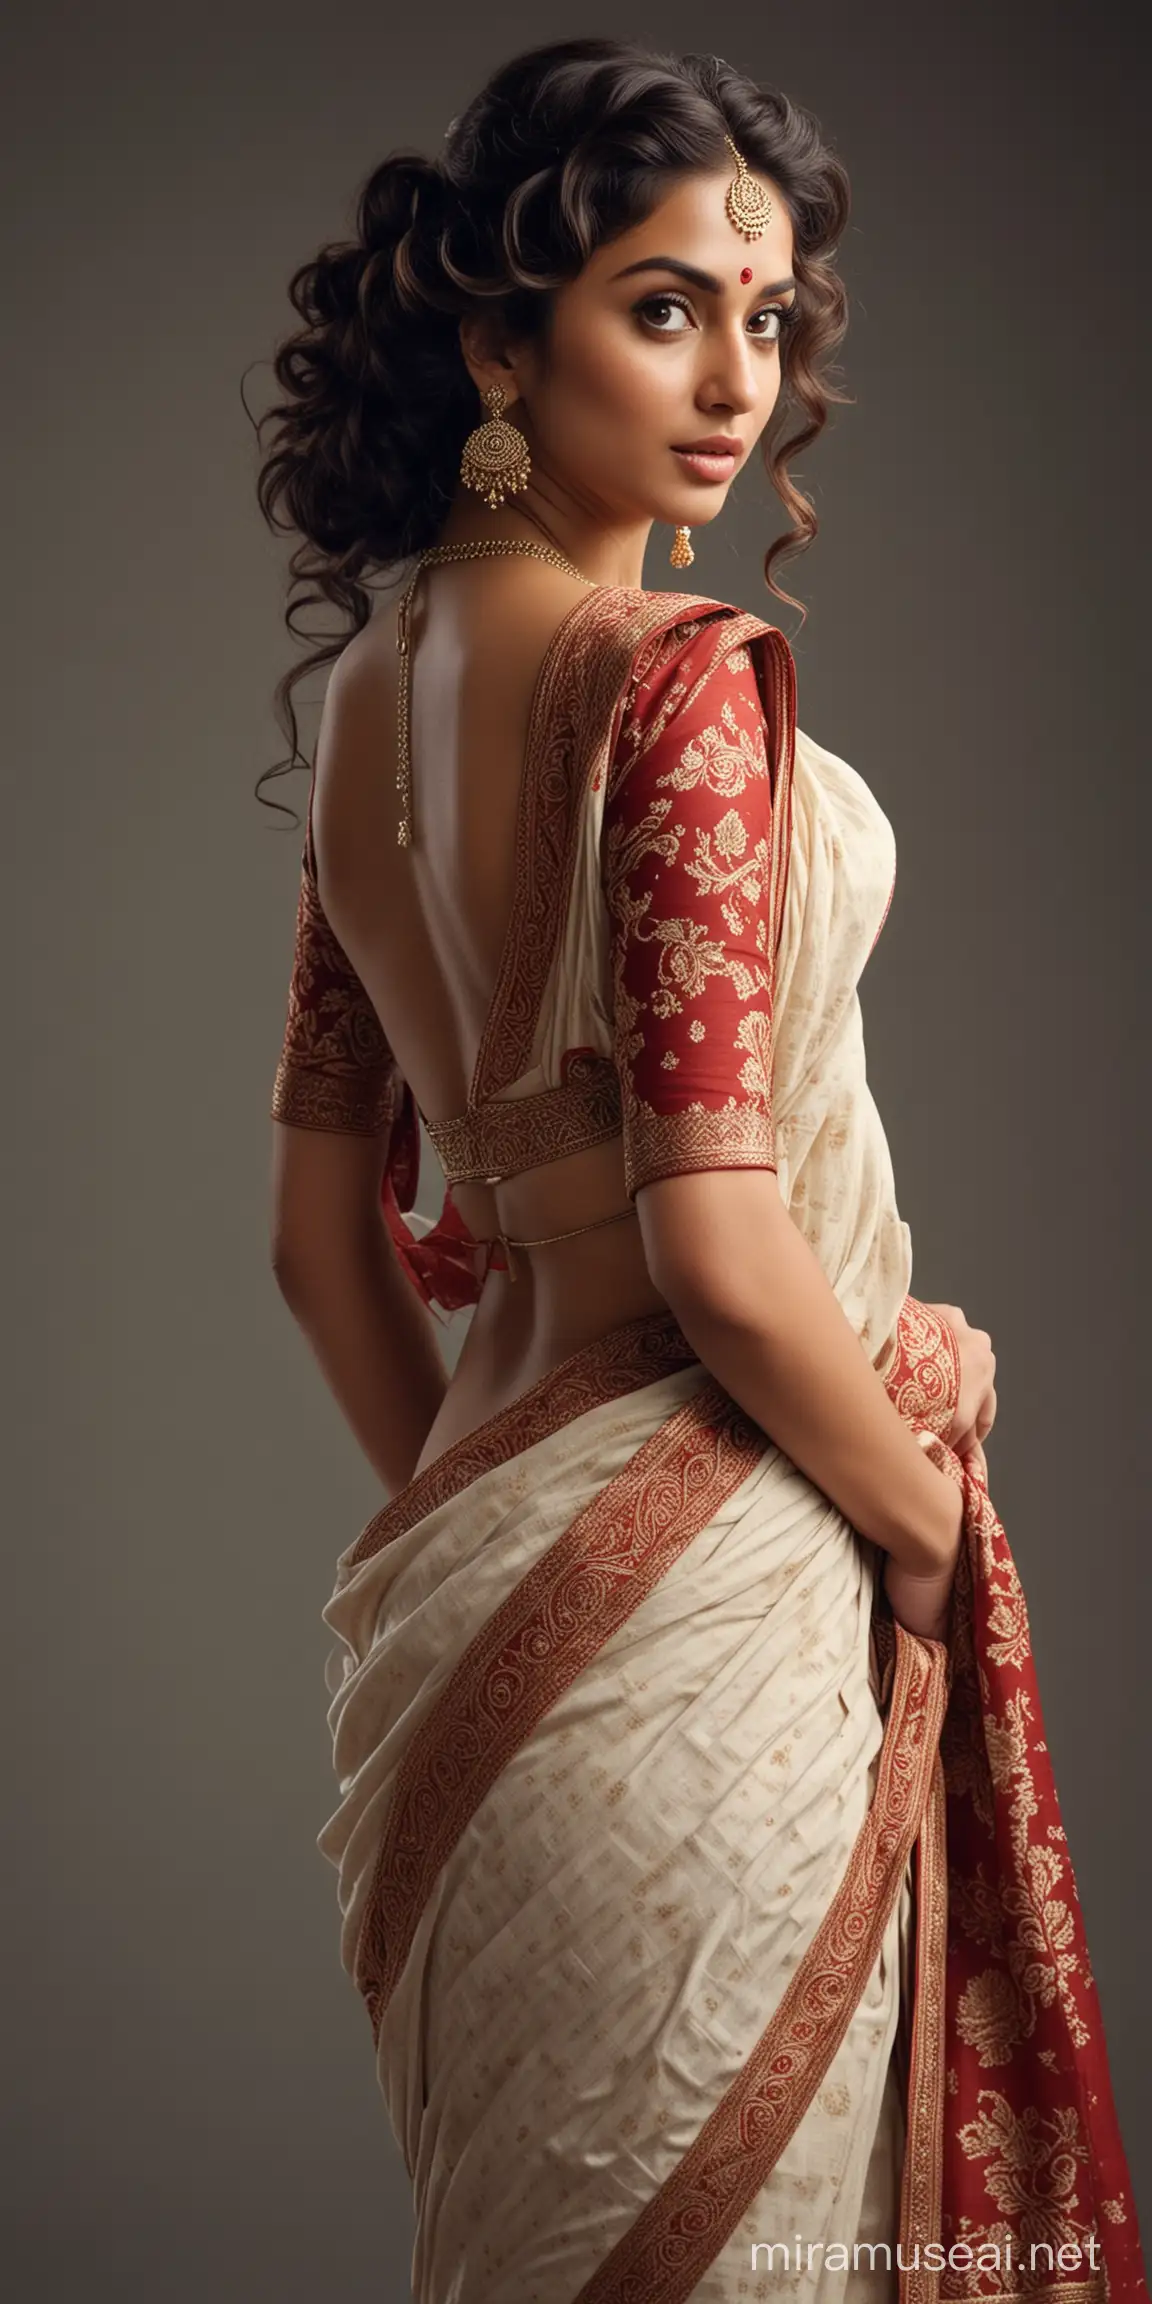 full body photo of most beautiful european woman as beautiful indian woman, long curly hair, wide eyes, full face, elegant beautiful SAREE look from back, tuned AWAY, lowcut back with big knot, showing back , looking back, brows raised with arrogance, grim, photo realistic, intricate details, color match, 4k.